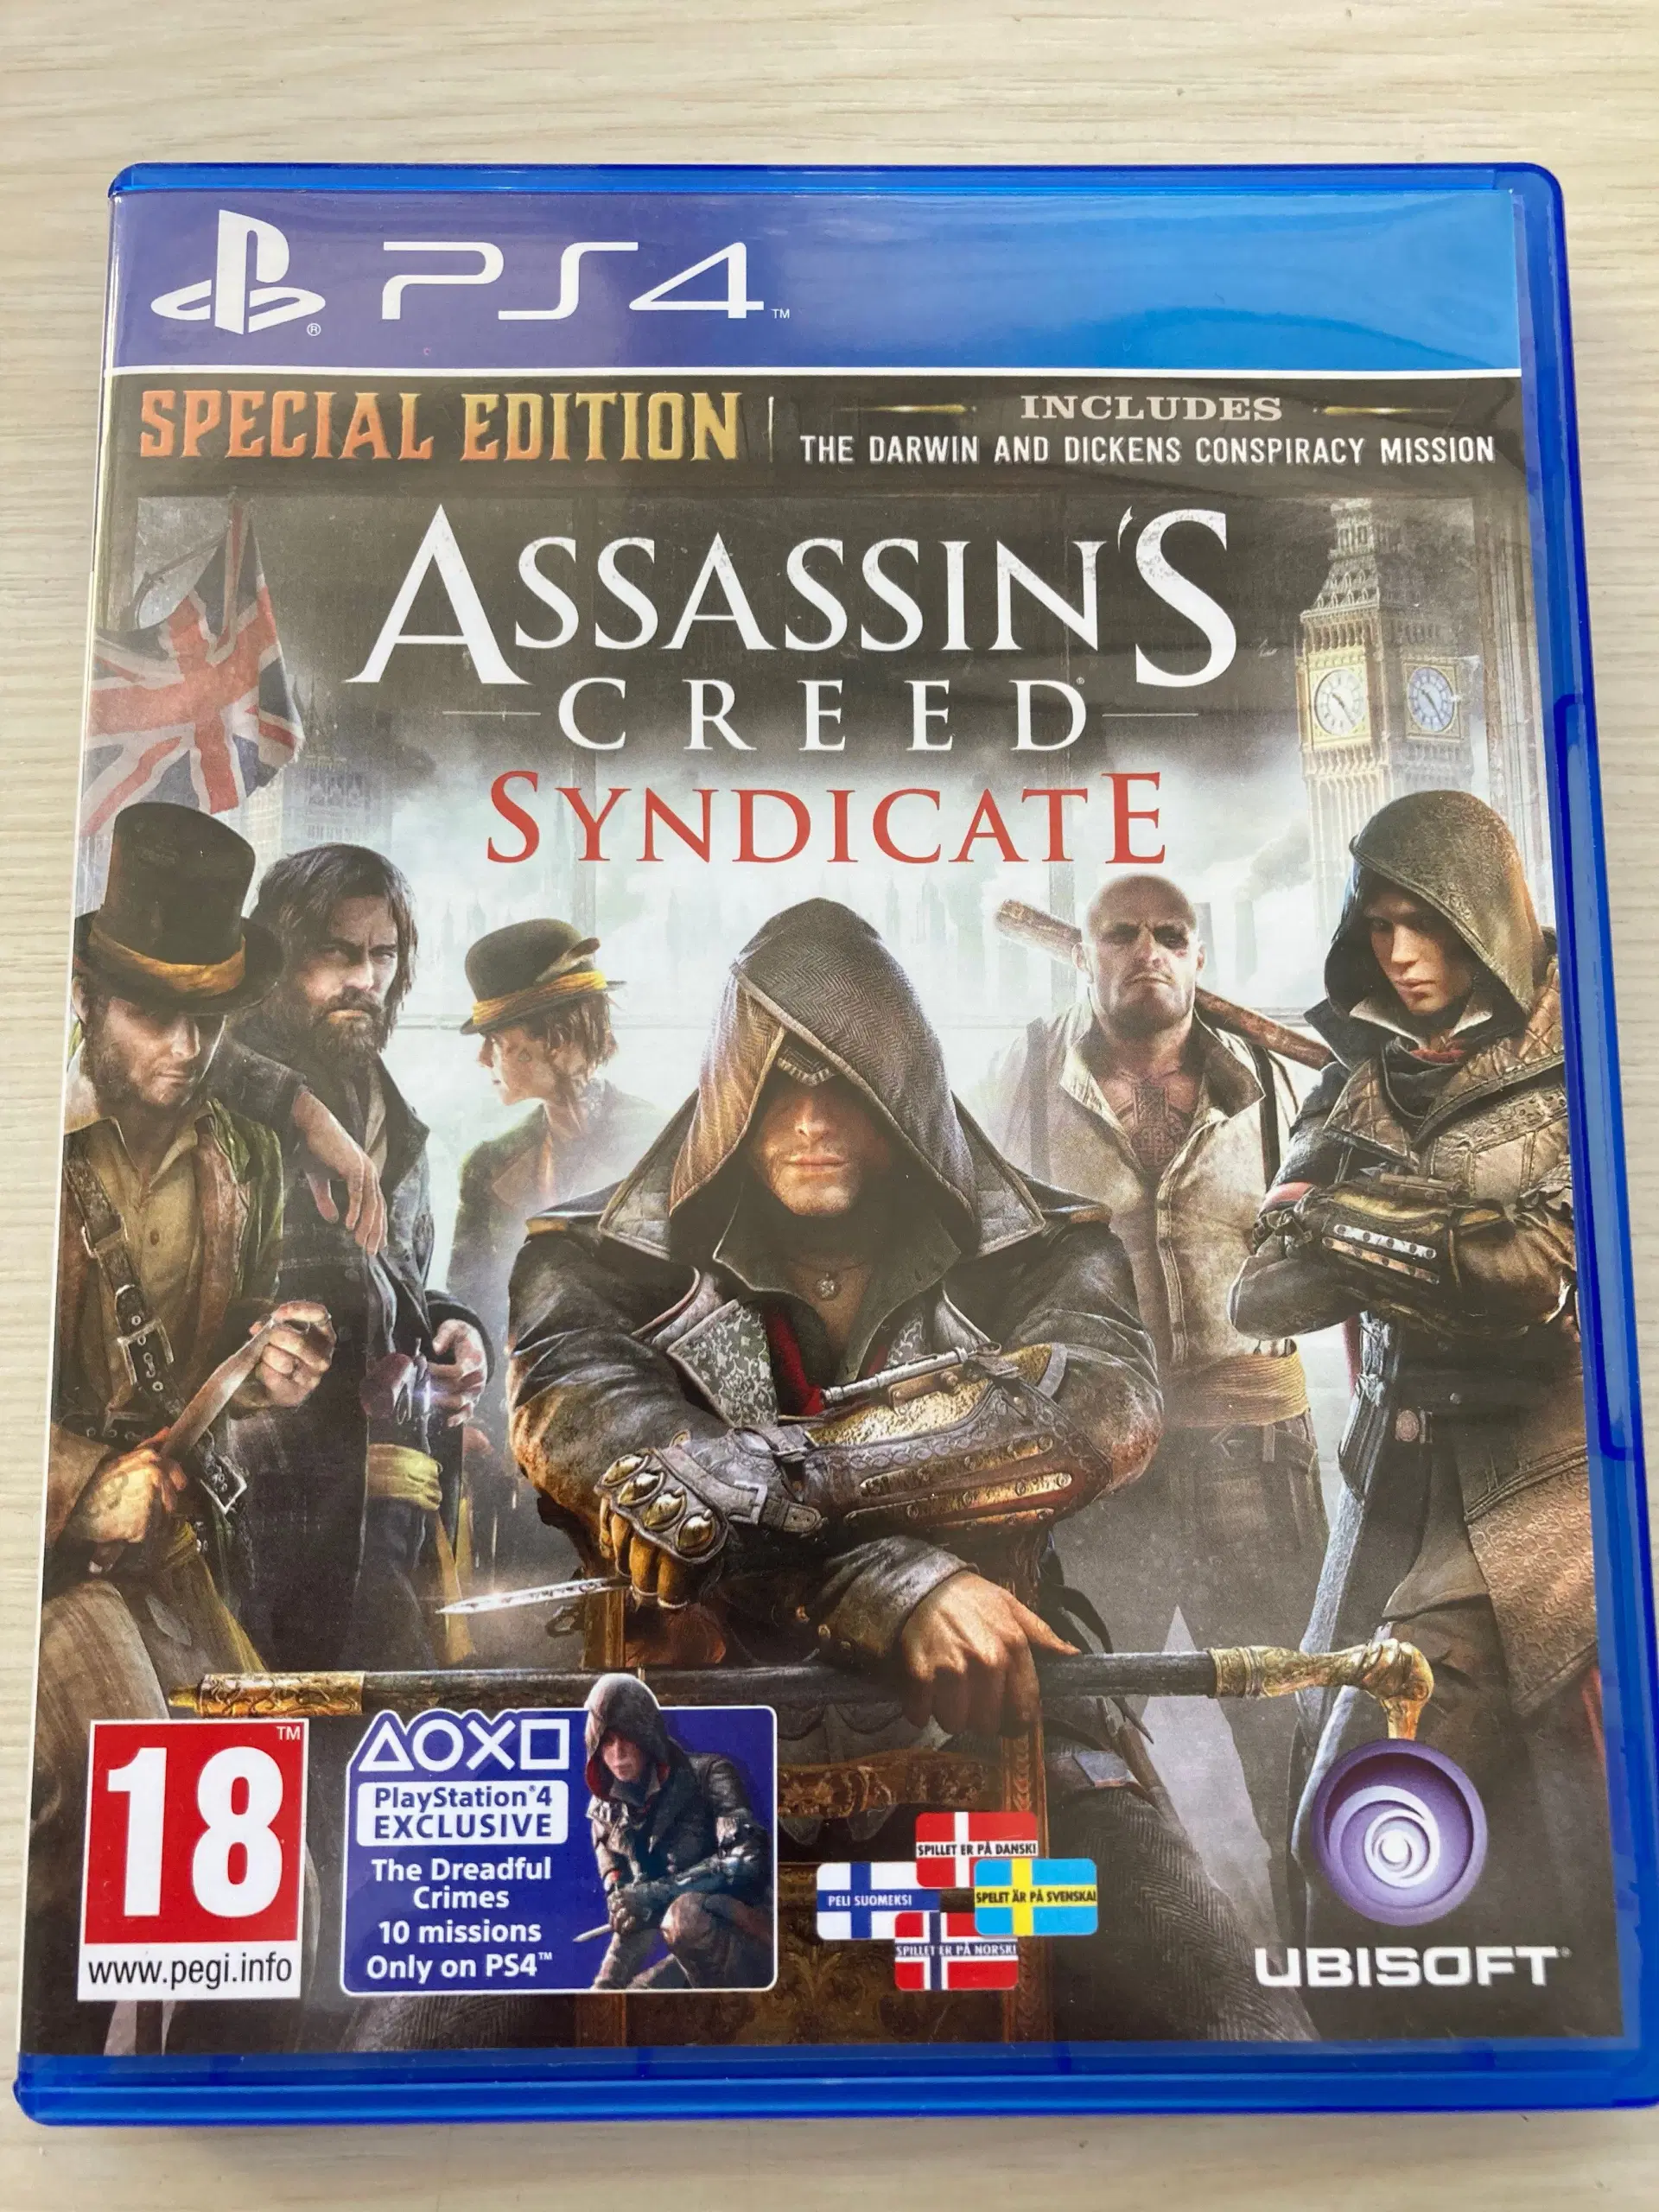 Assassin?s Creed Syndicate